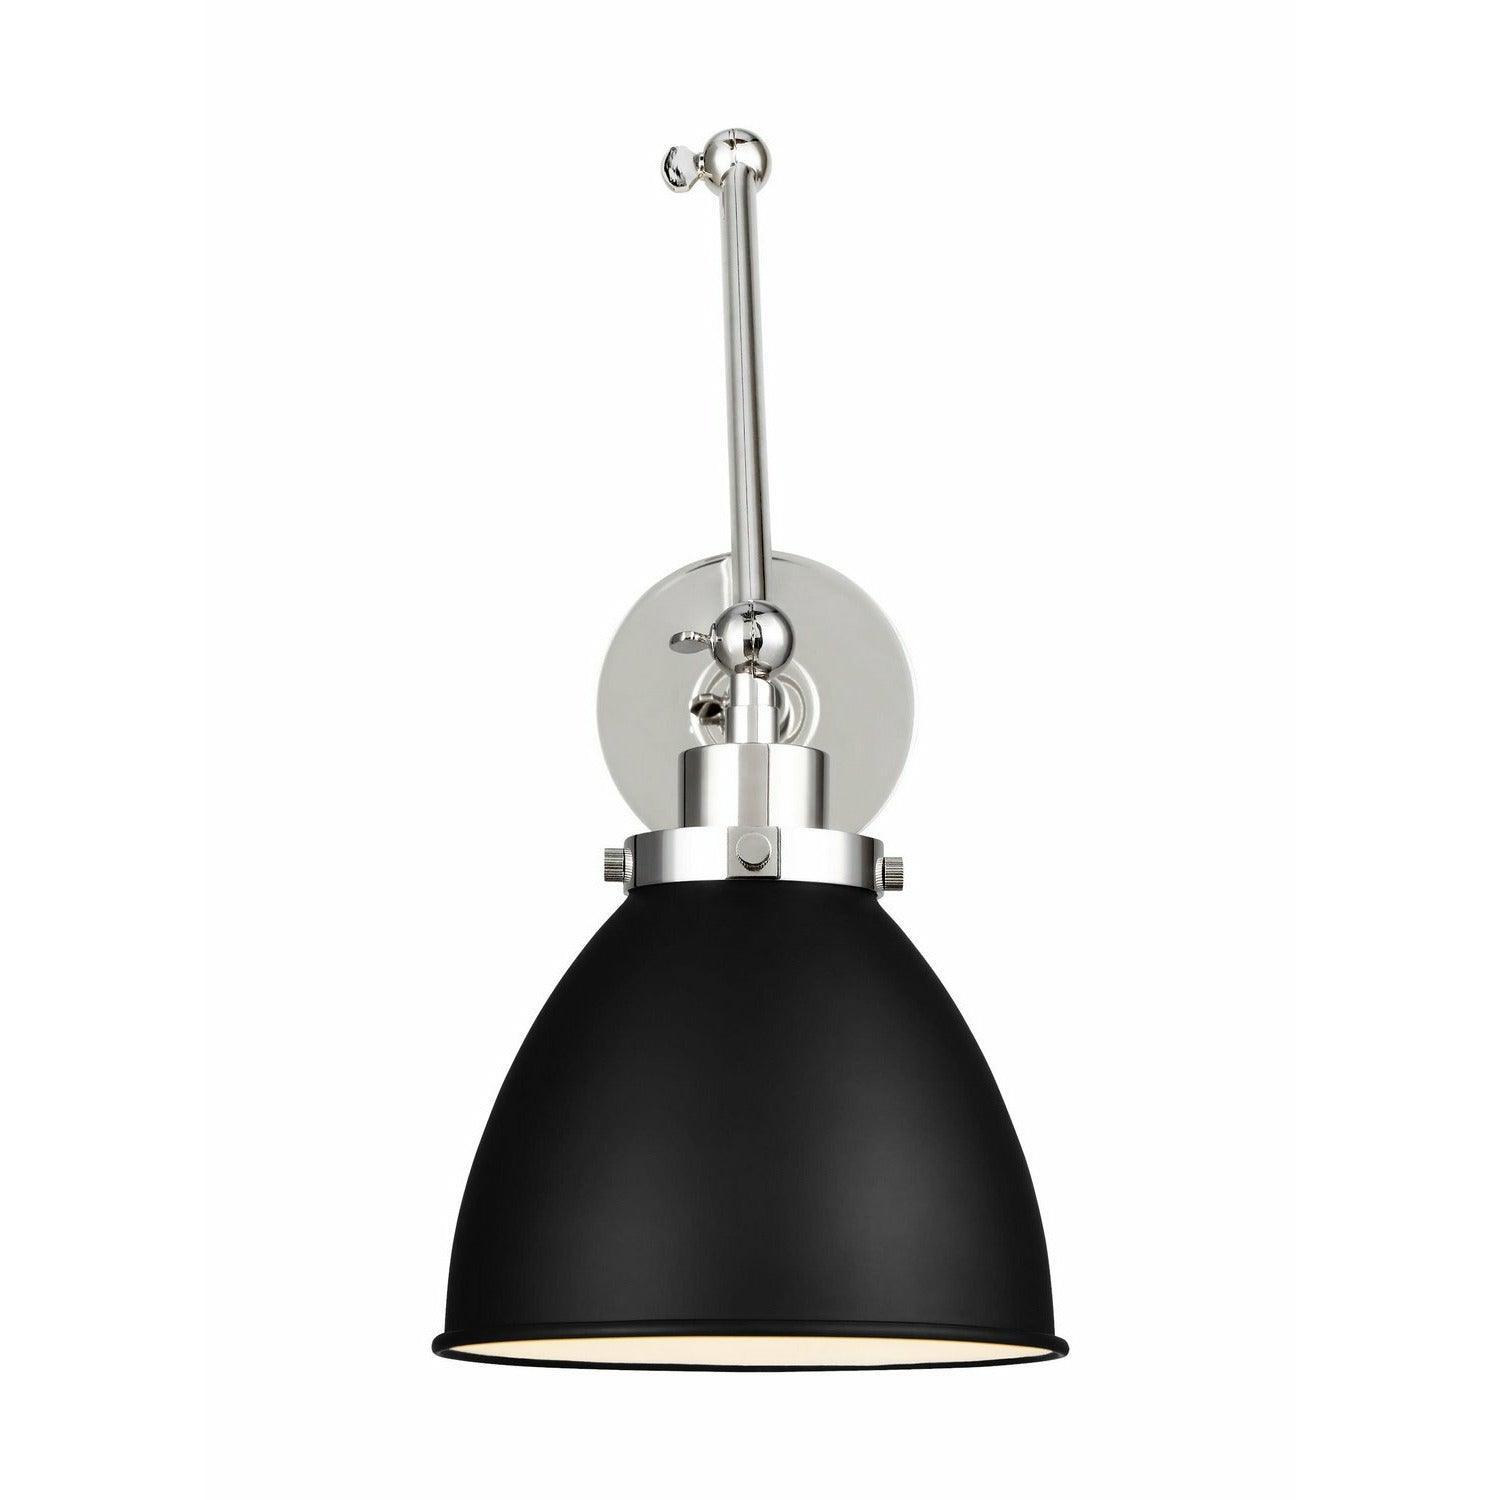 Visual Comfort Studio Collection - Wellfleet Double Arm Dome Wall Sconce - CW1161MBKPN | Montreal Lighting & Hardware